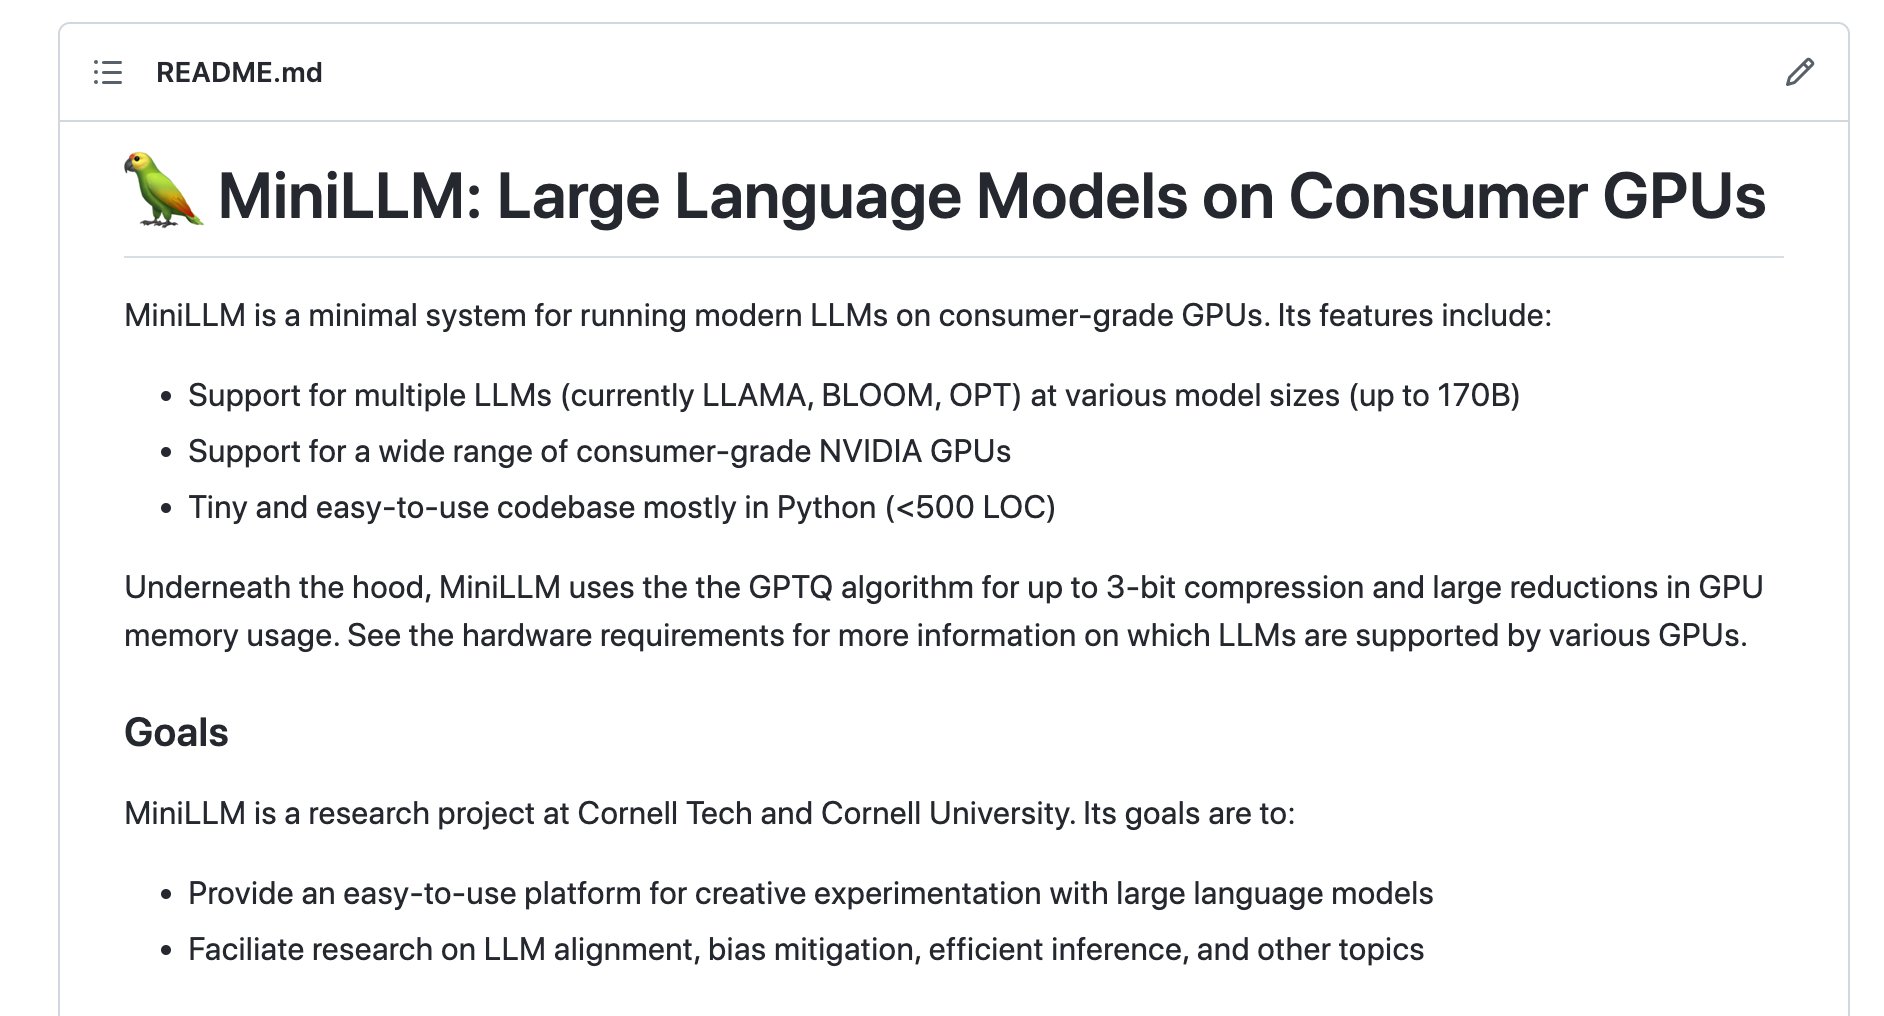 My weekend side project: MiniLLM, a minimal system for running modern LLMs on consumer GPUs ✨    🐦  Supports multiple LLMs (LLAMA, BLOOM, OPT)  �